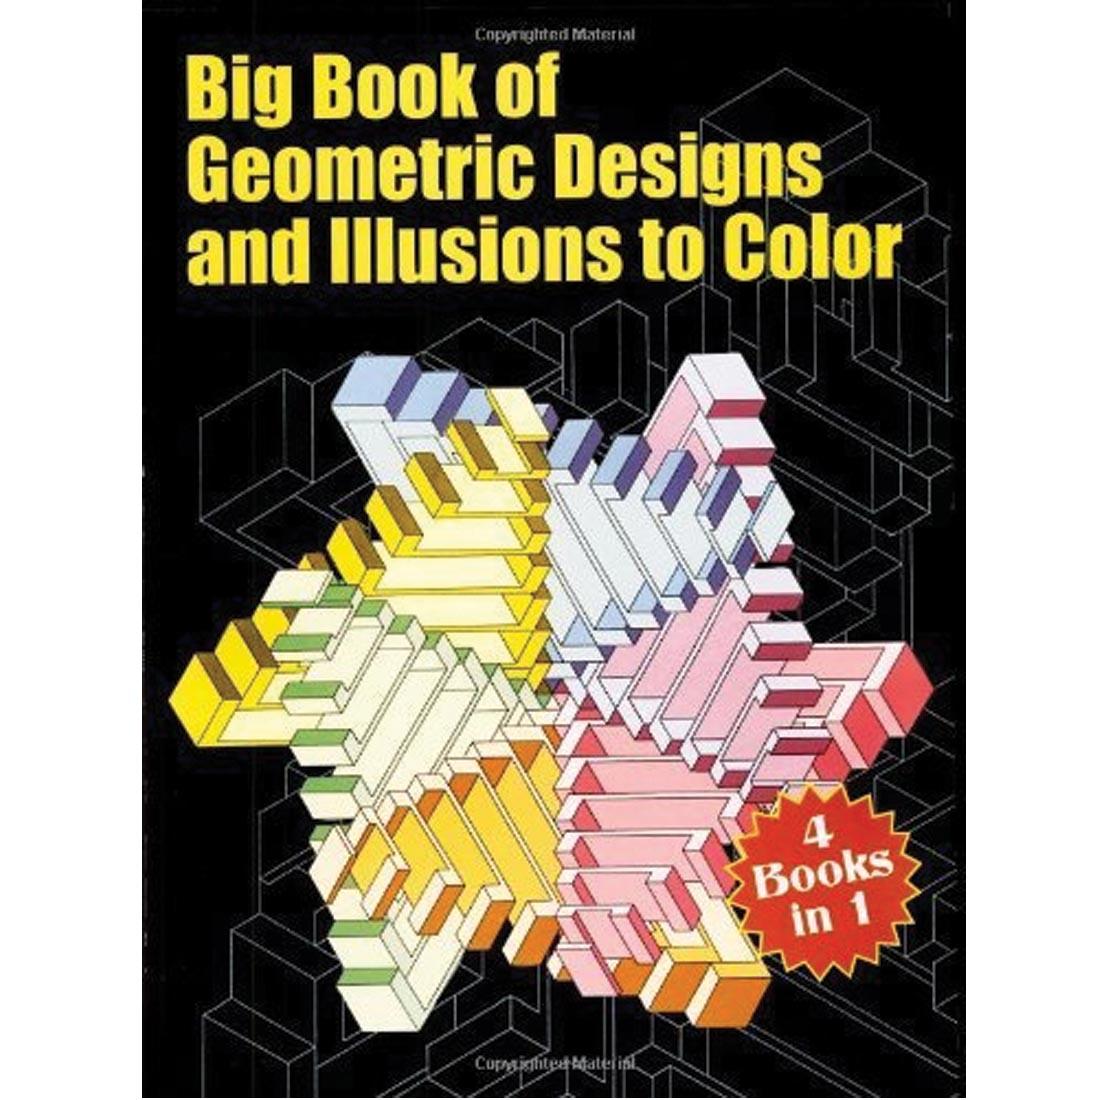 Big Book of Geometric Designs & Illusions To Color by Dover